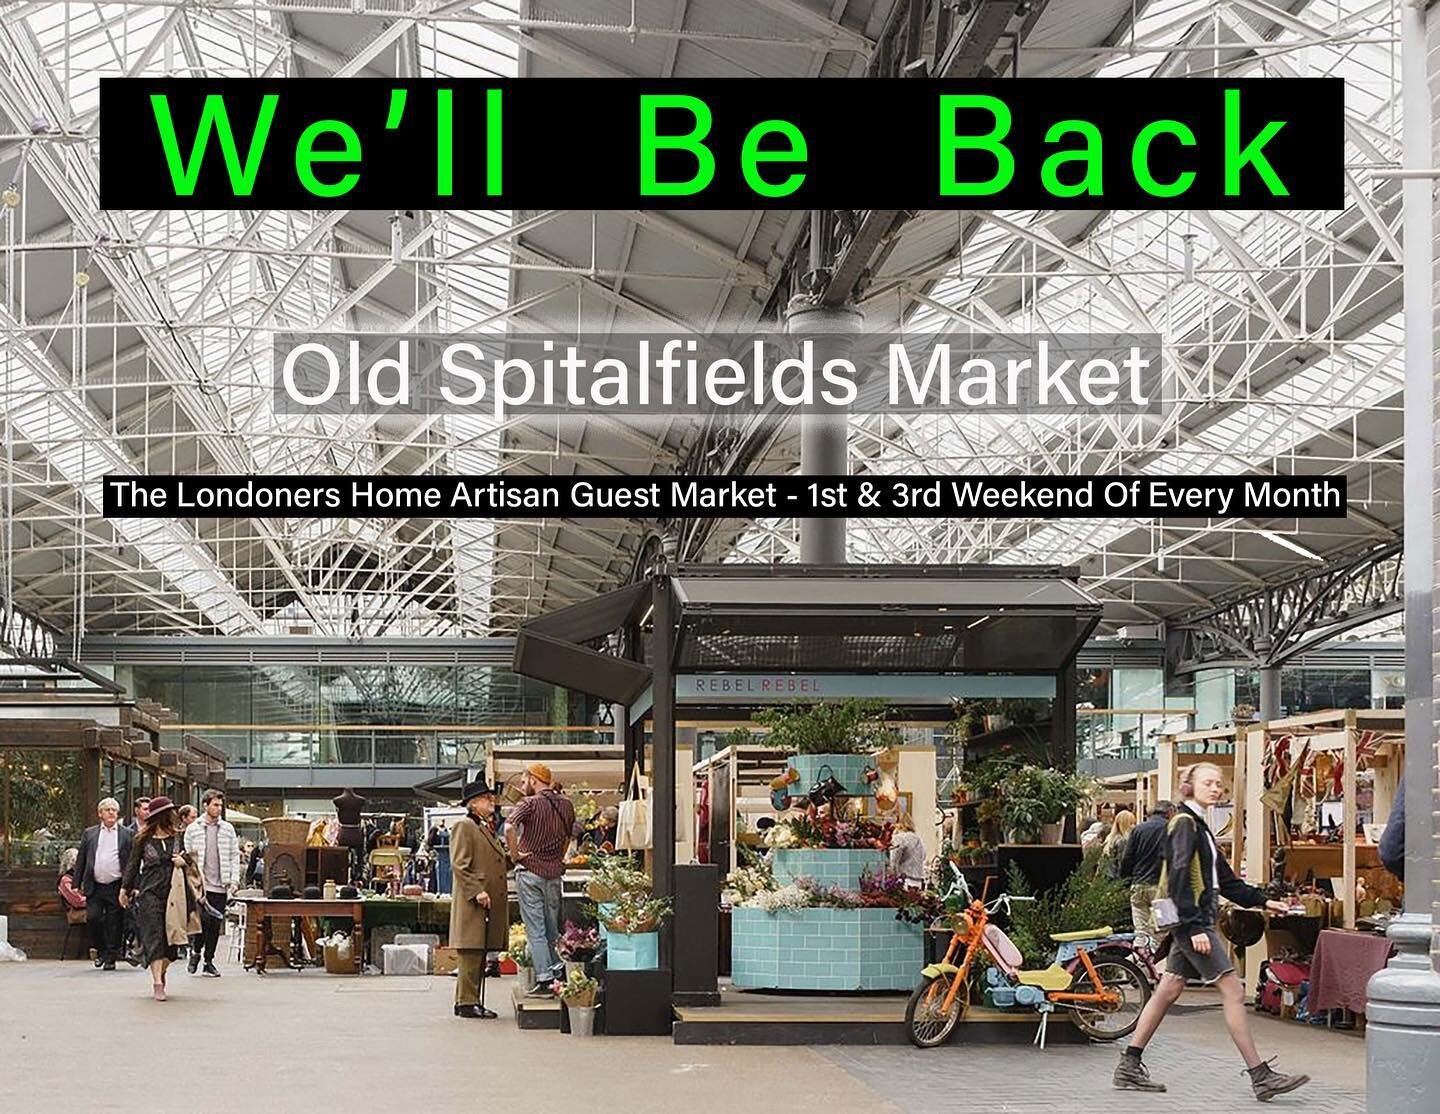 Spring is around the corner🌼
Hopefully it won&rsquo;t be long before we can open up again and everyone can enjoy just being out and about enjoying themselves
🙂
Viva social and community engagement 
⚓️🌈❤️
:
:
:
:
#oldspitalfieldsmarket #eastlondon 